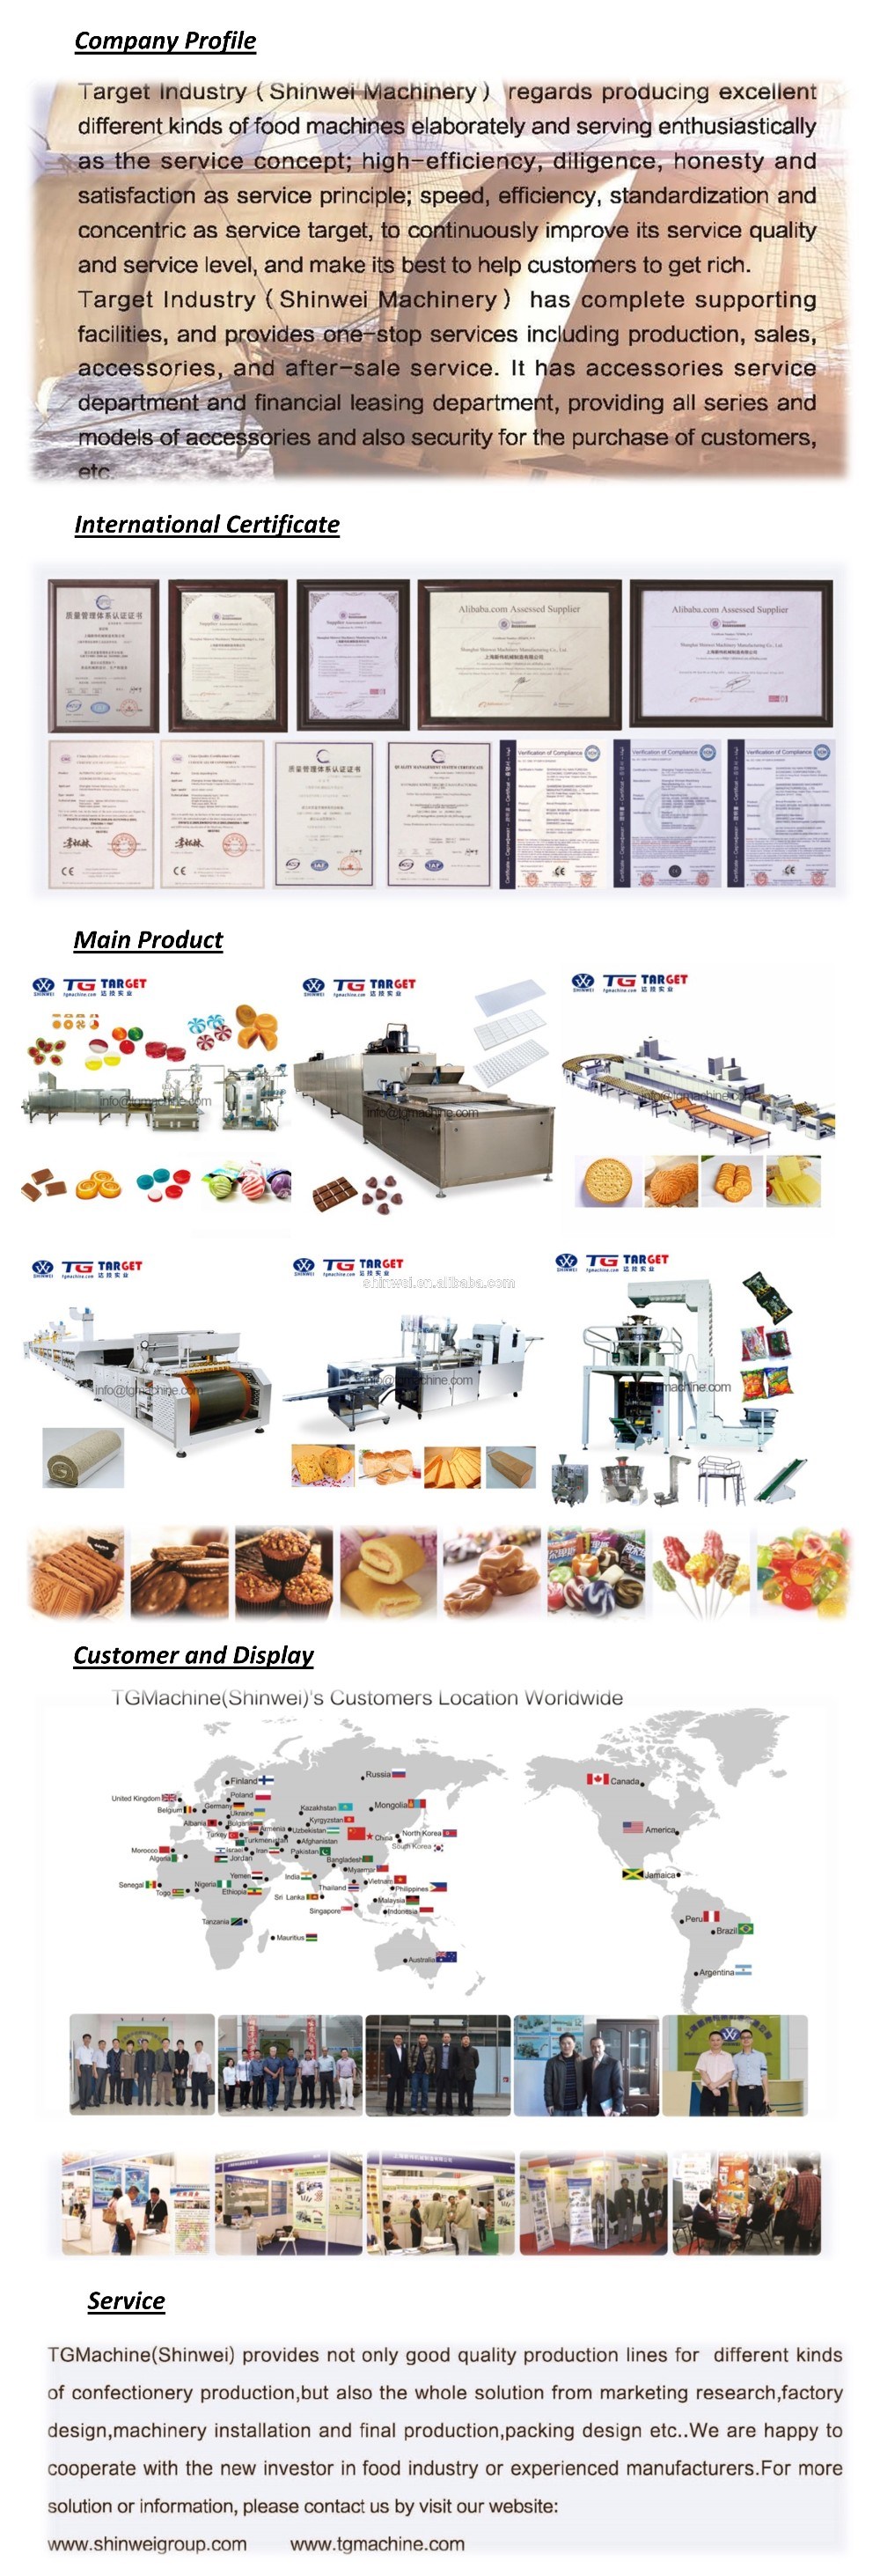 Automatic Biscuit Cookie Production Line (For cup cake/Custard cake)